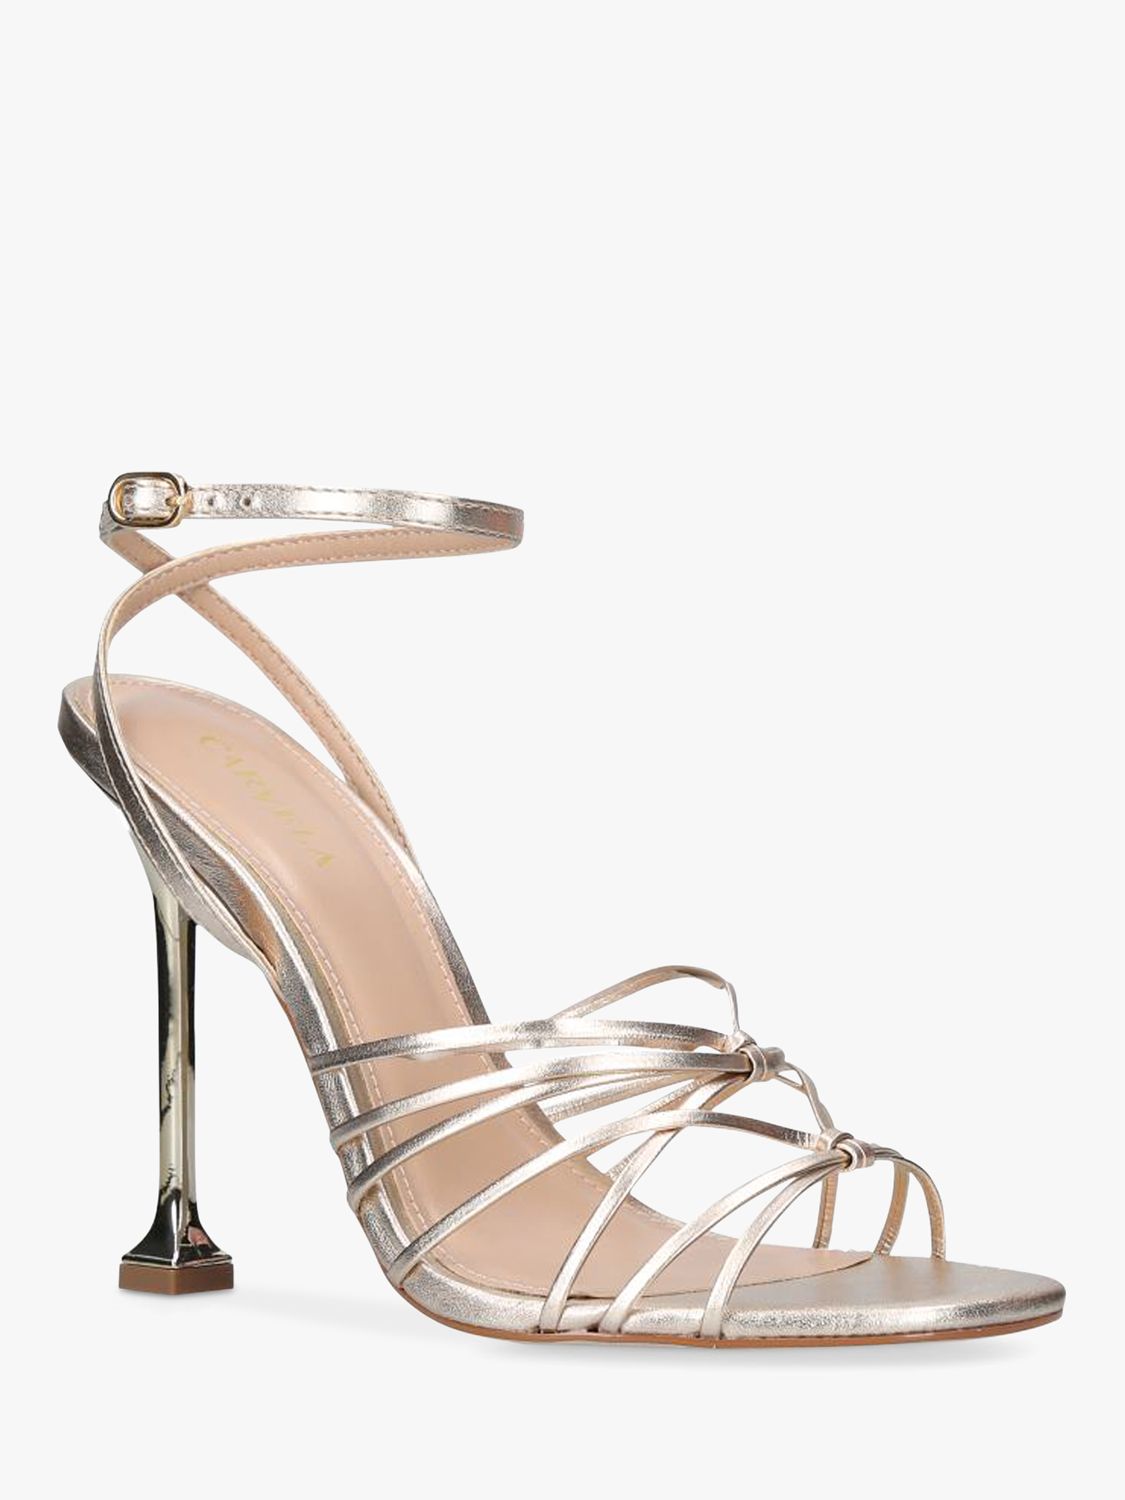 Carvela Glowing Leather Fluted Heel Strappy Sandals, Gold, 7